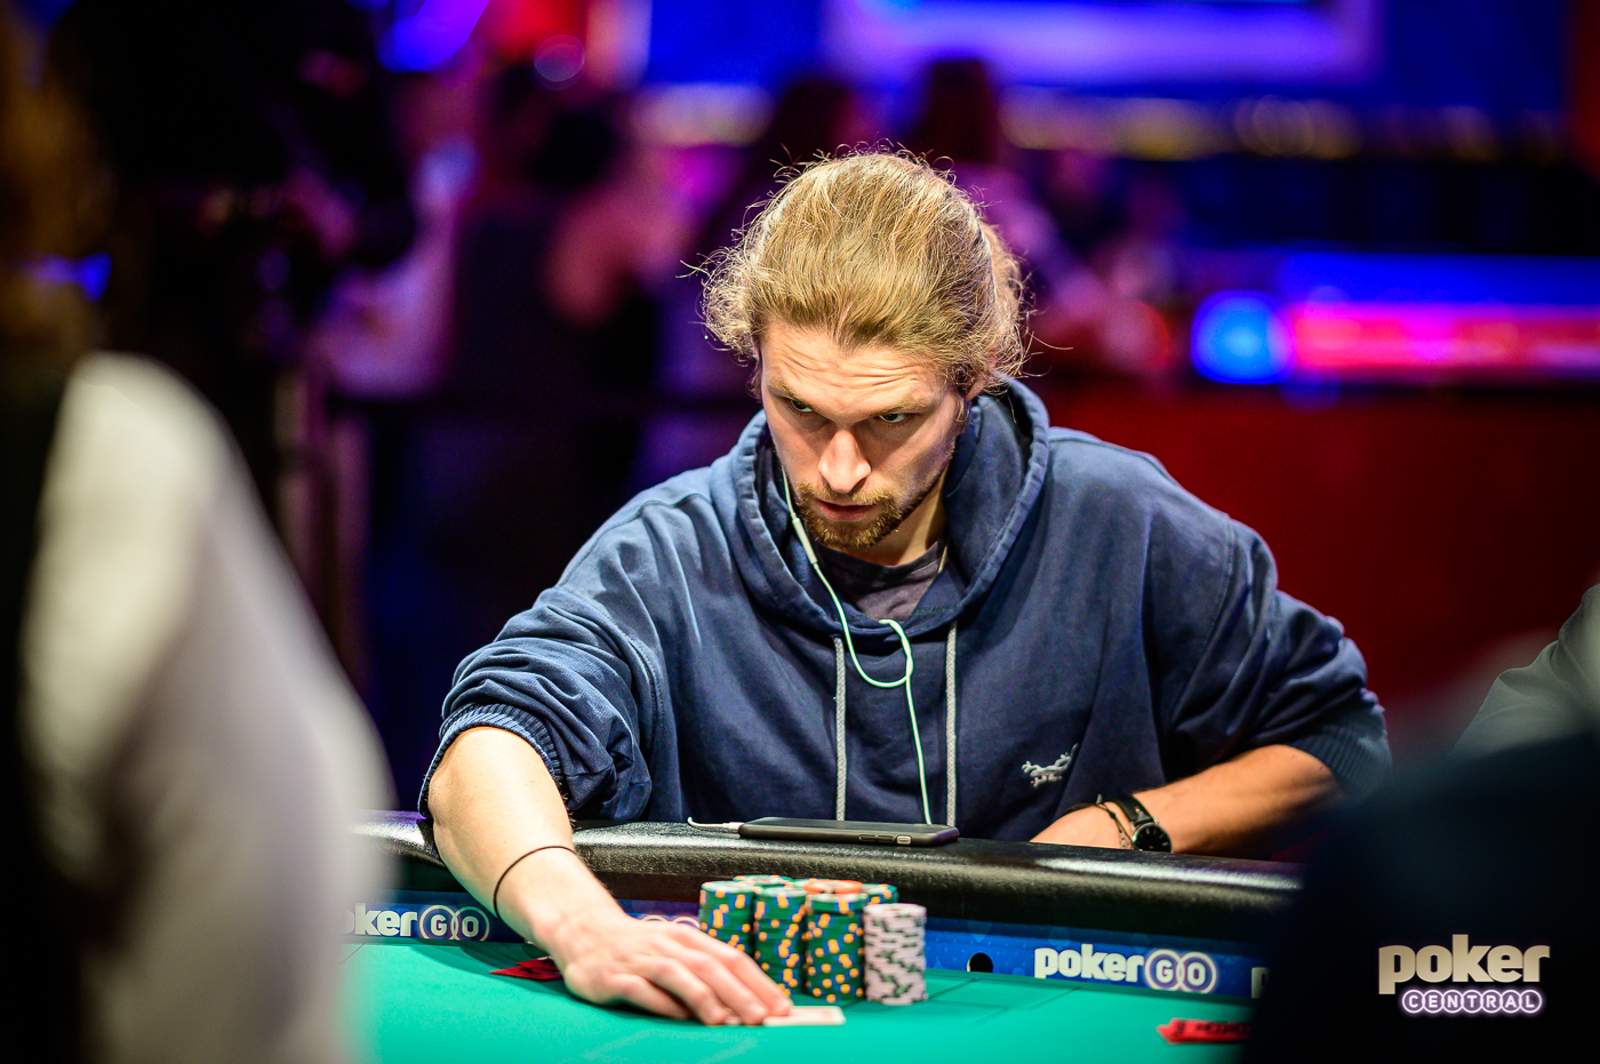 WSOP Report Day # 5 - Big 50 Sets Record, Heath Holds Lead in $50,000 Event #5 Final